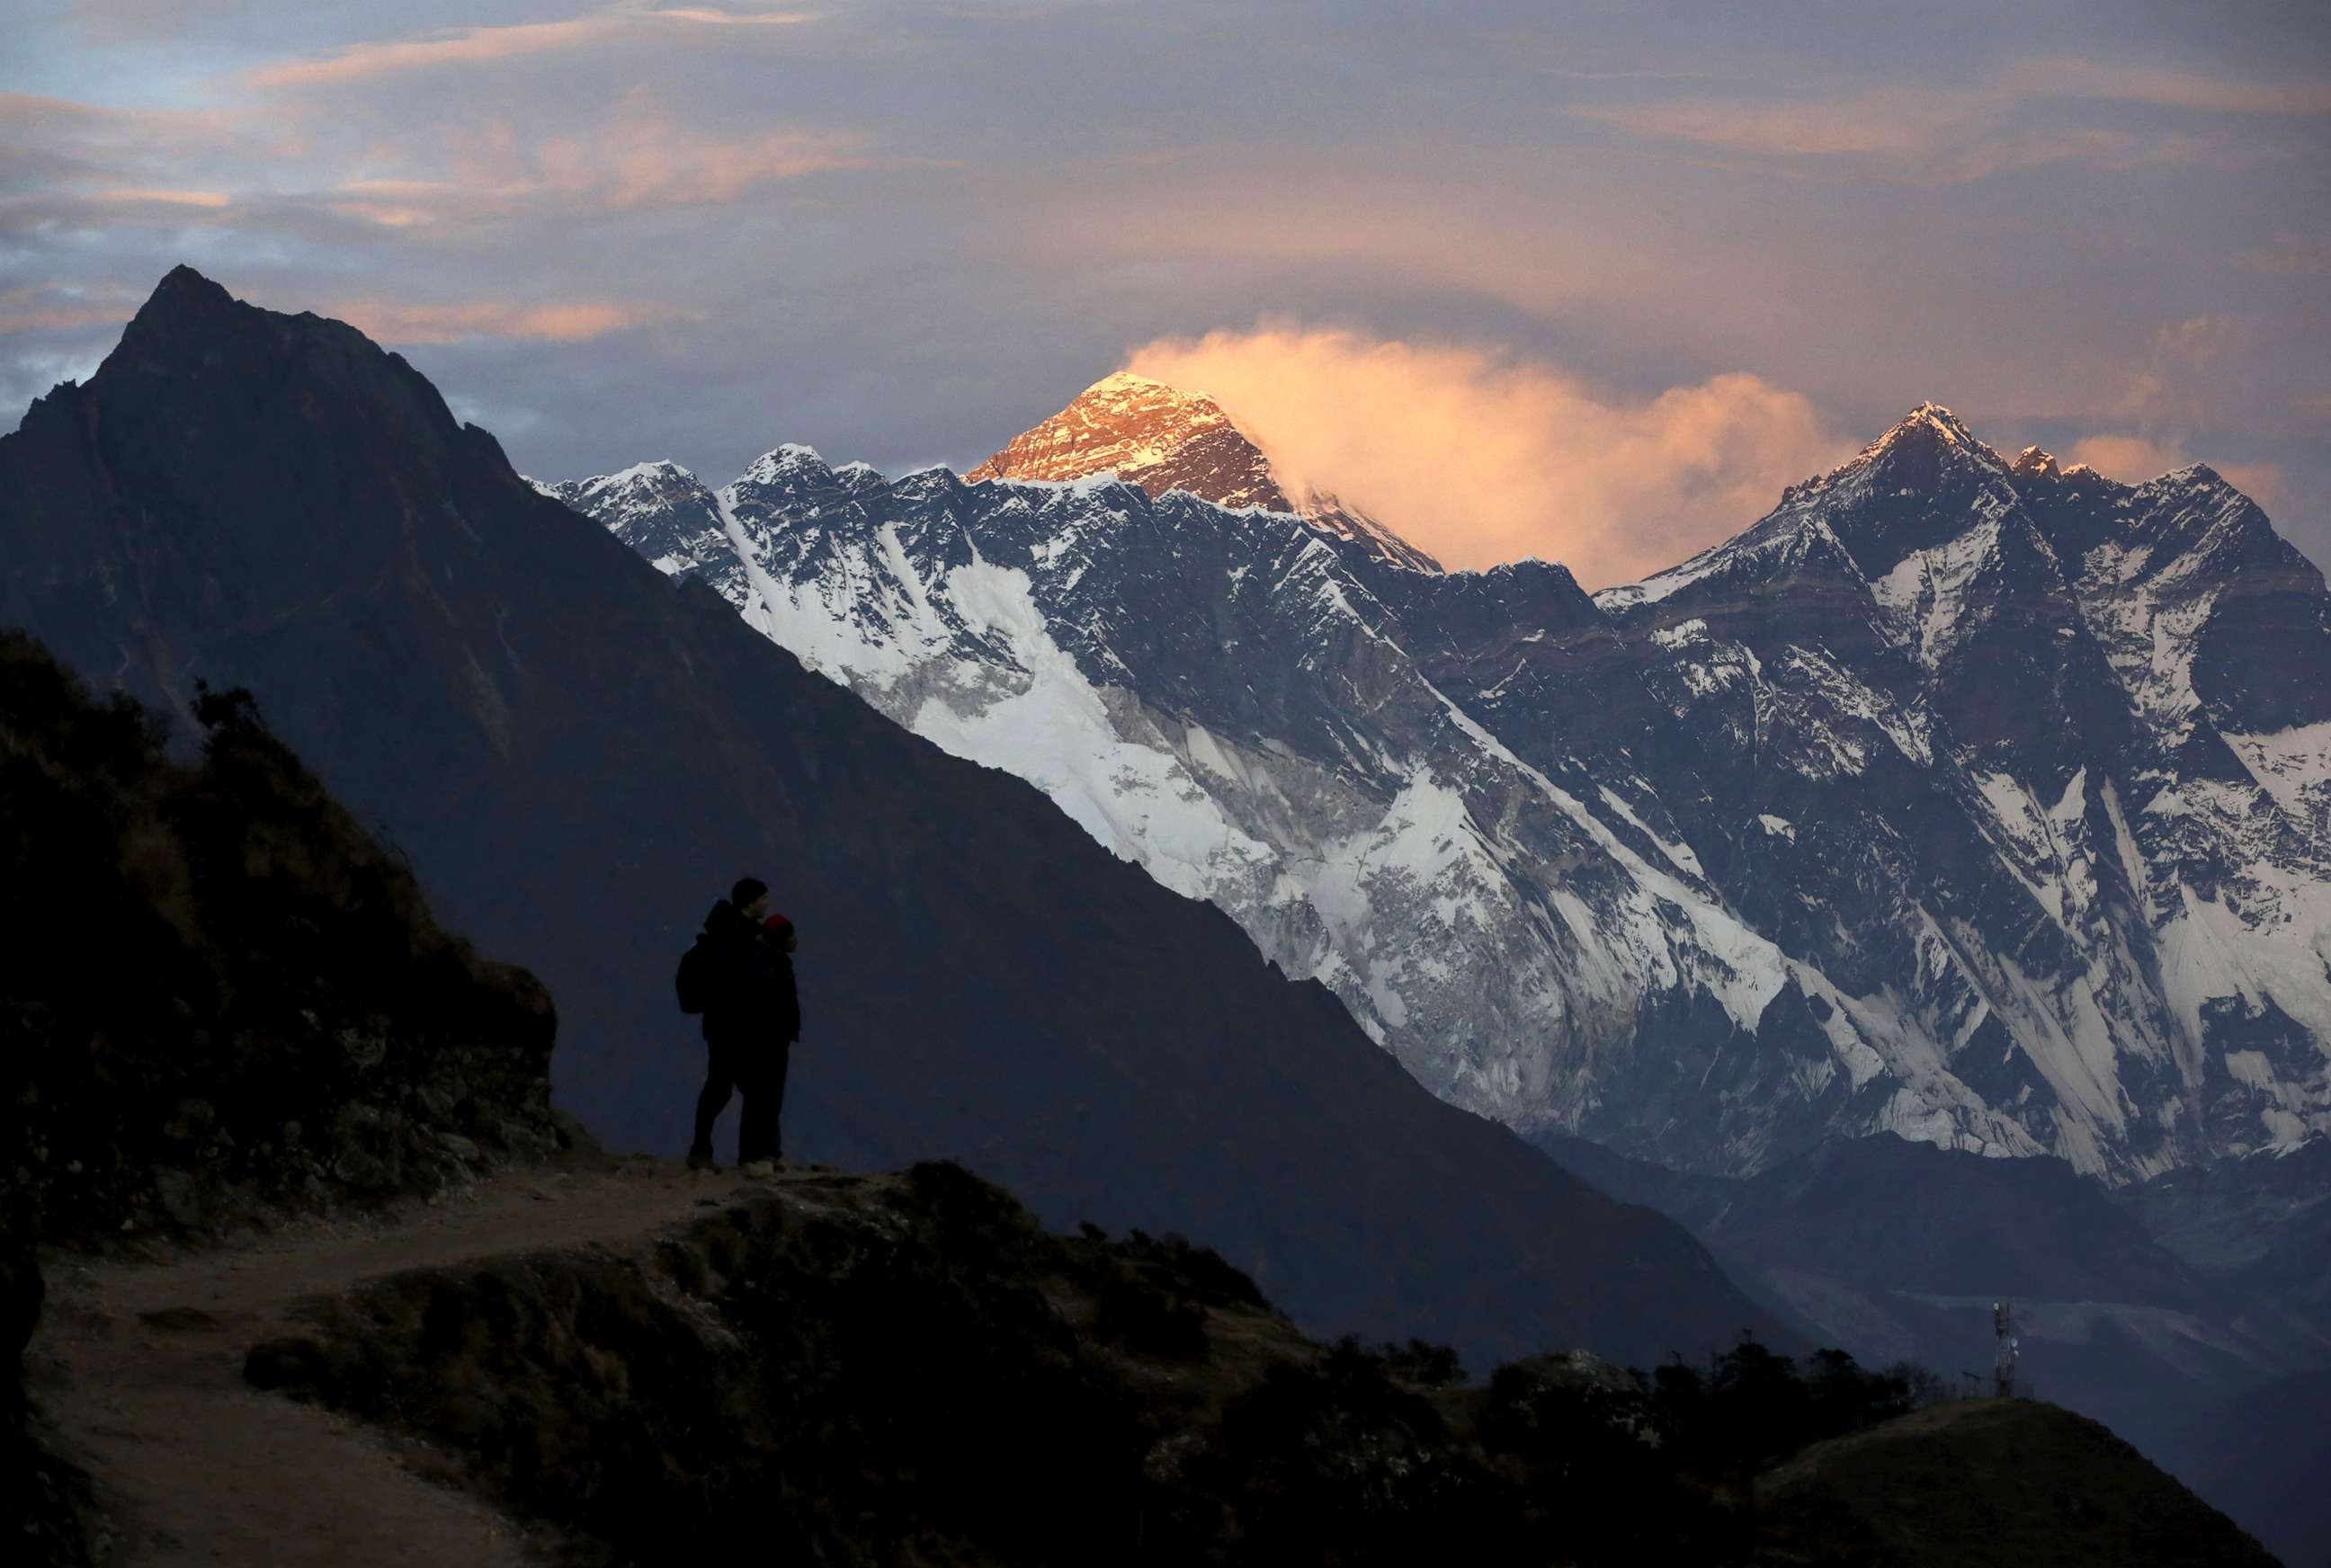 PHOTO: Light illuminates Mount Everest during sunset in Solukhumbu district, also known as the Everest region, Nov.30, 2015.